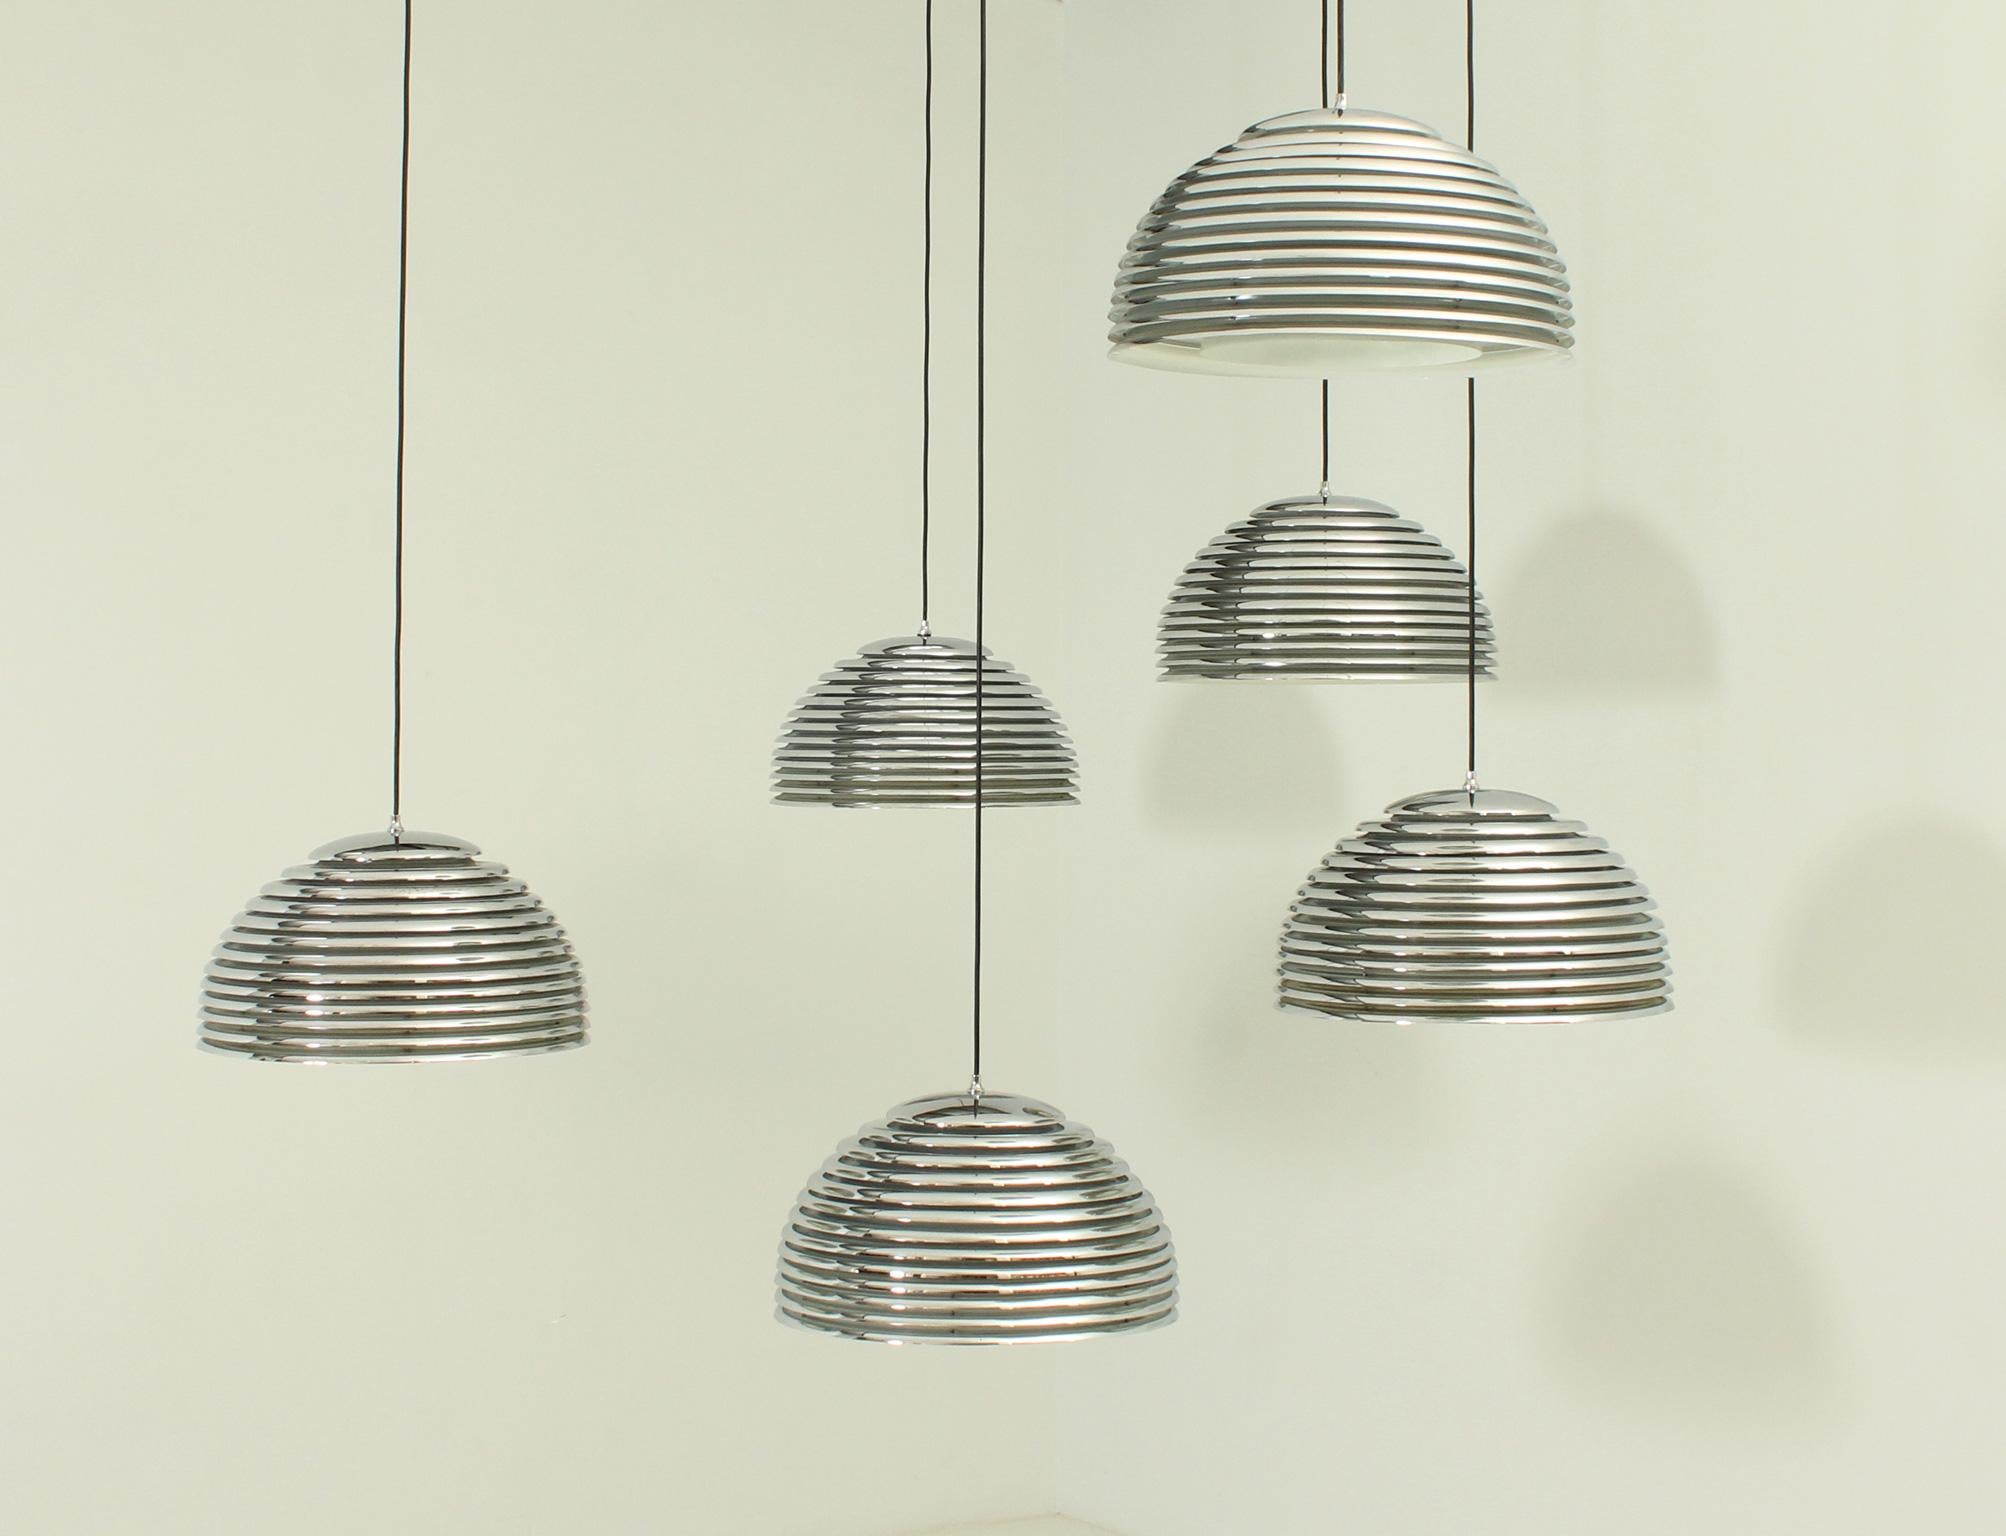 Large Saturno Pendant Lamps by Kazuo Motozawa for Staff, 1972 For Sale 3